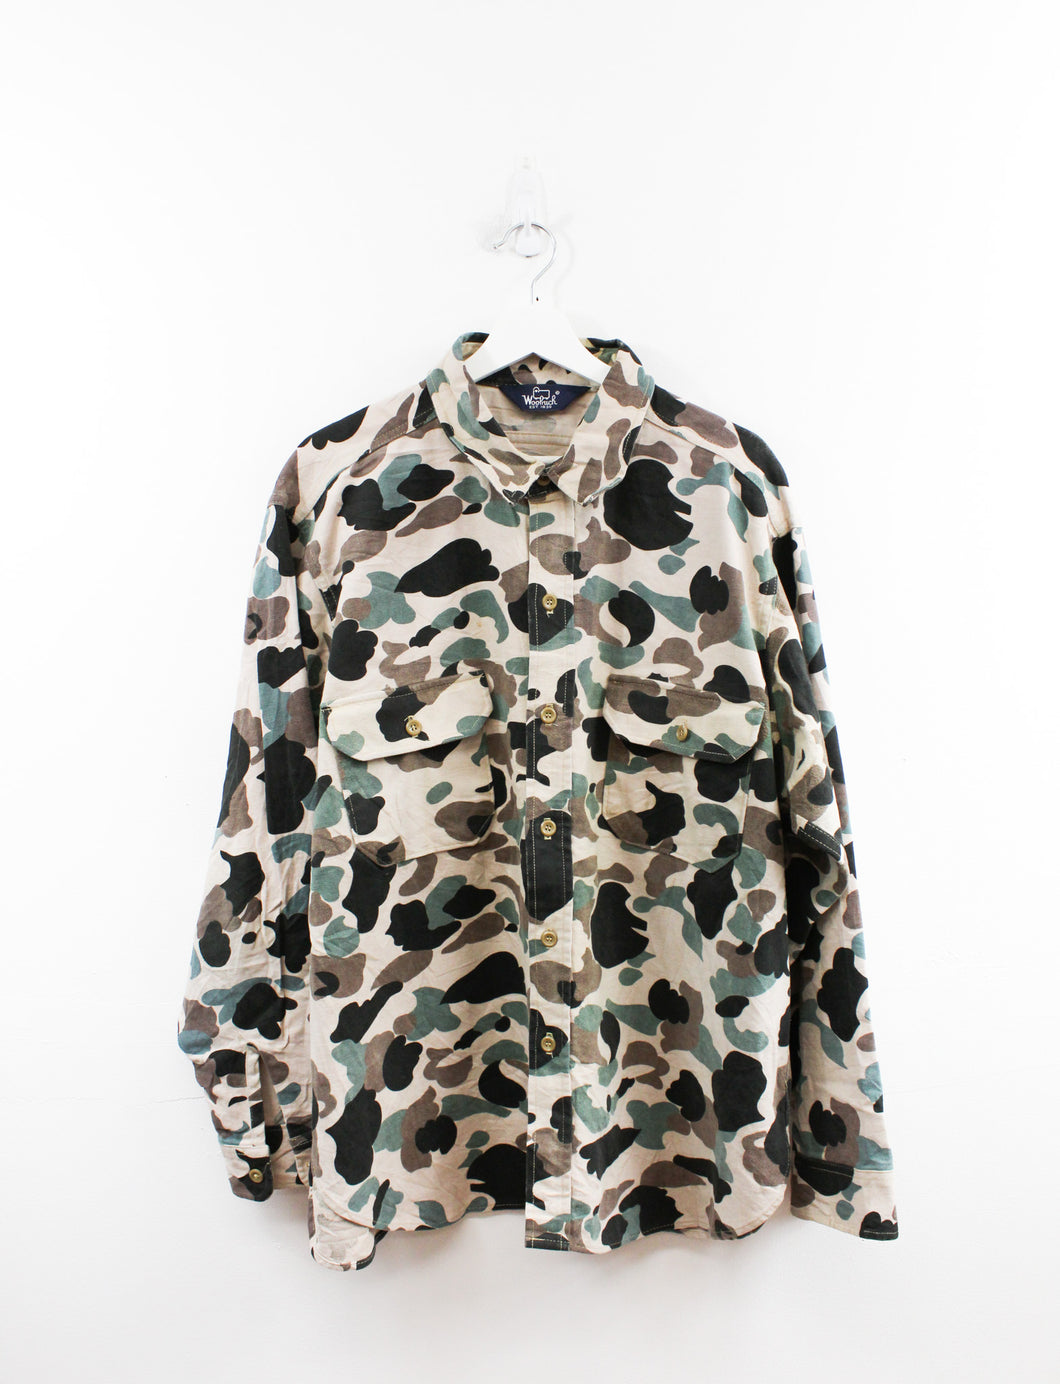 Vintage Woolrich Military Camouflage Button Up